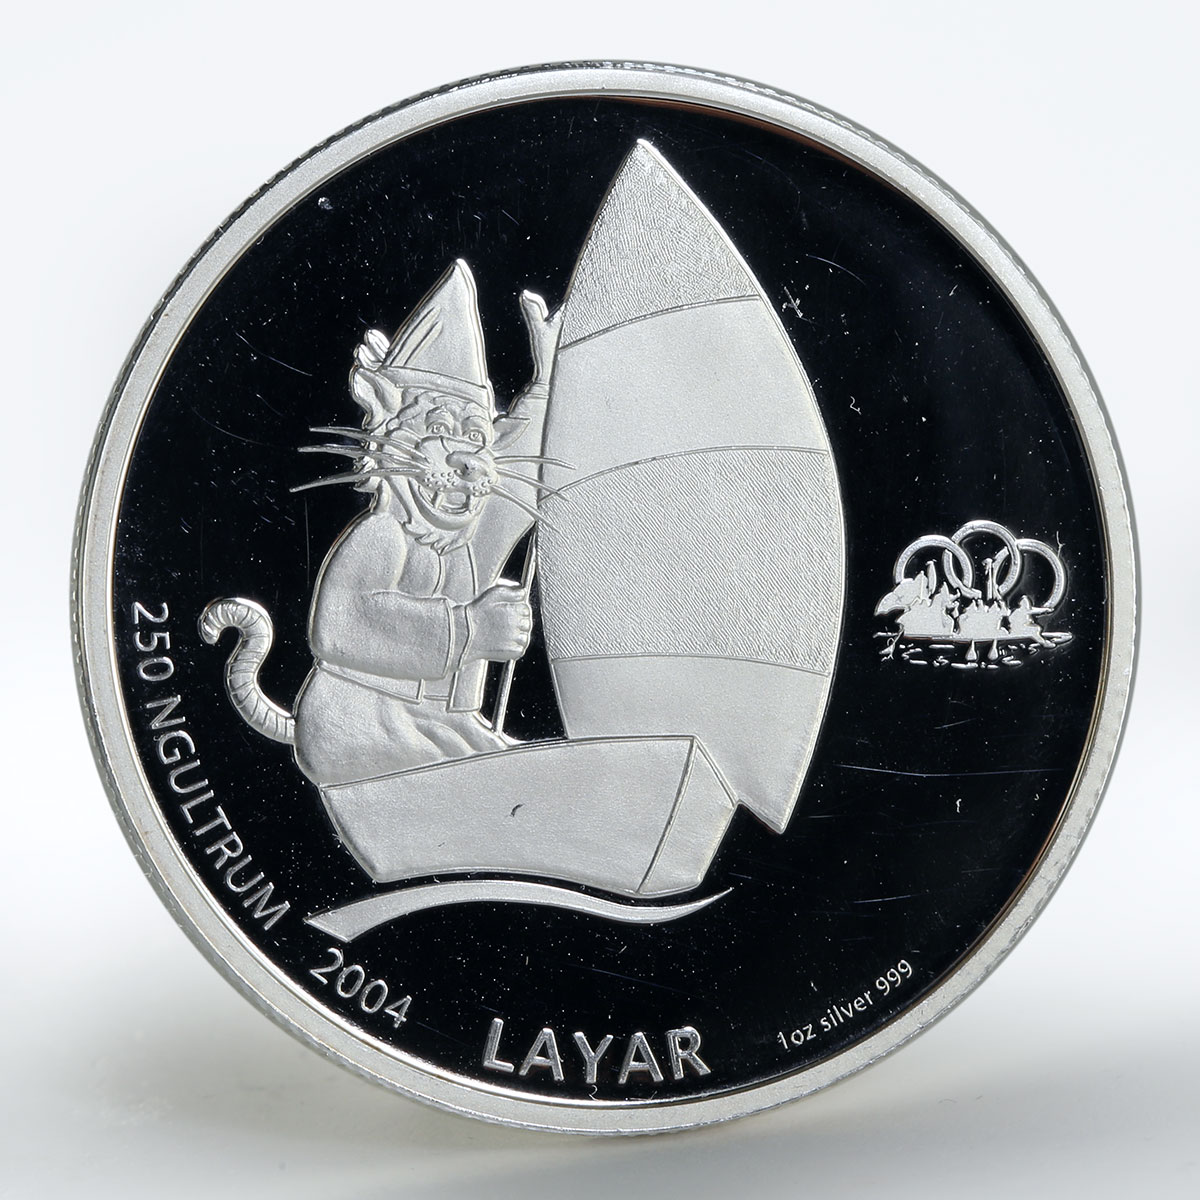 Bhutan 250 ngultrum Games Sailing proof silver coin 2004